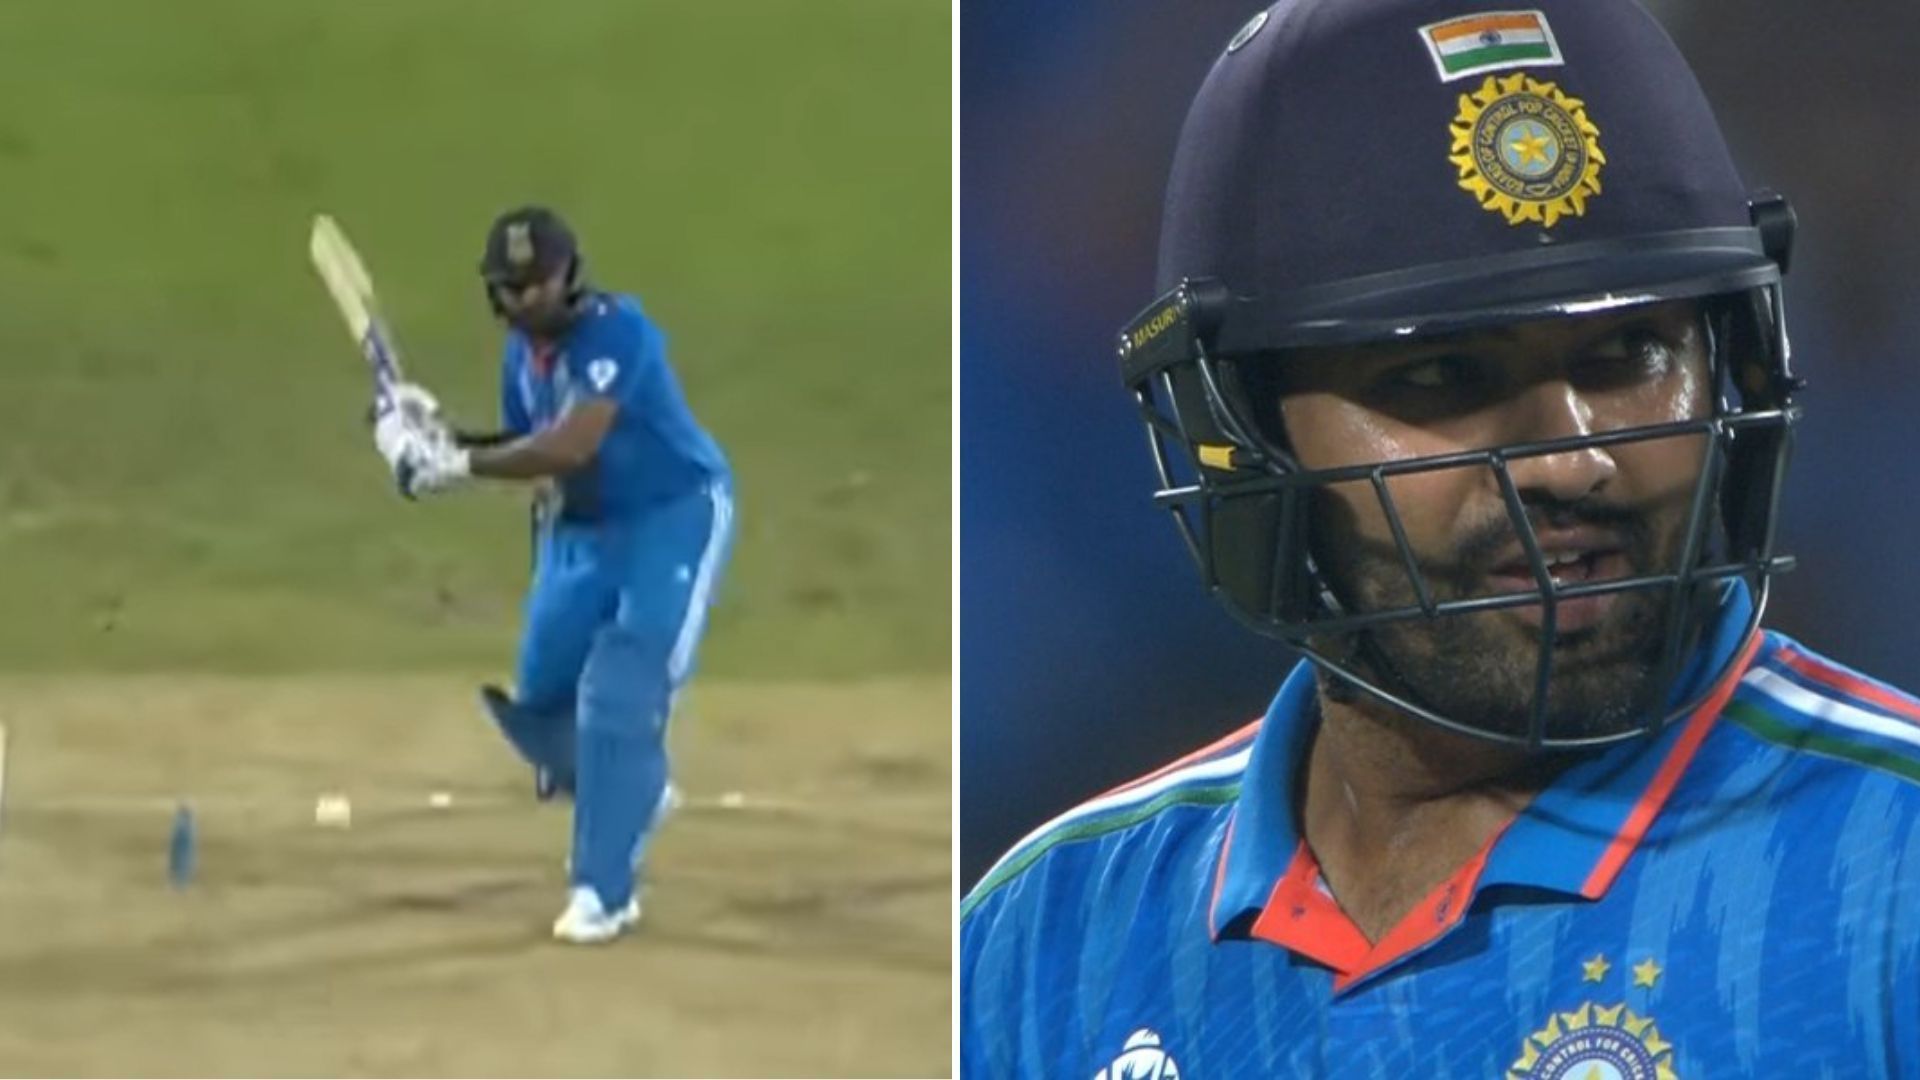 Rohit Sharma just missed out on clearing the ropes so close to his fifty (P.C.:ICC &amp; X)